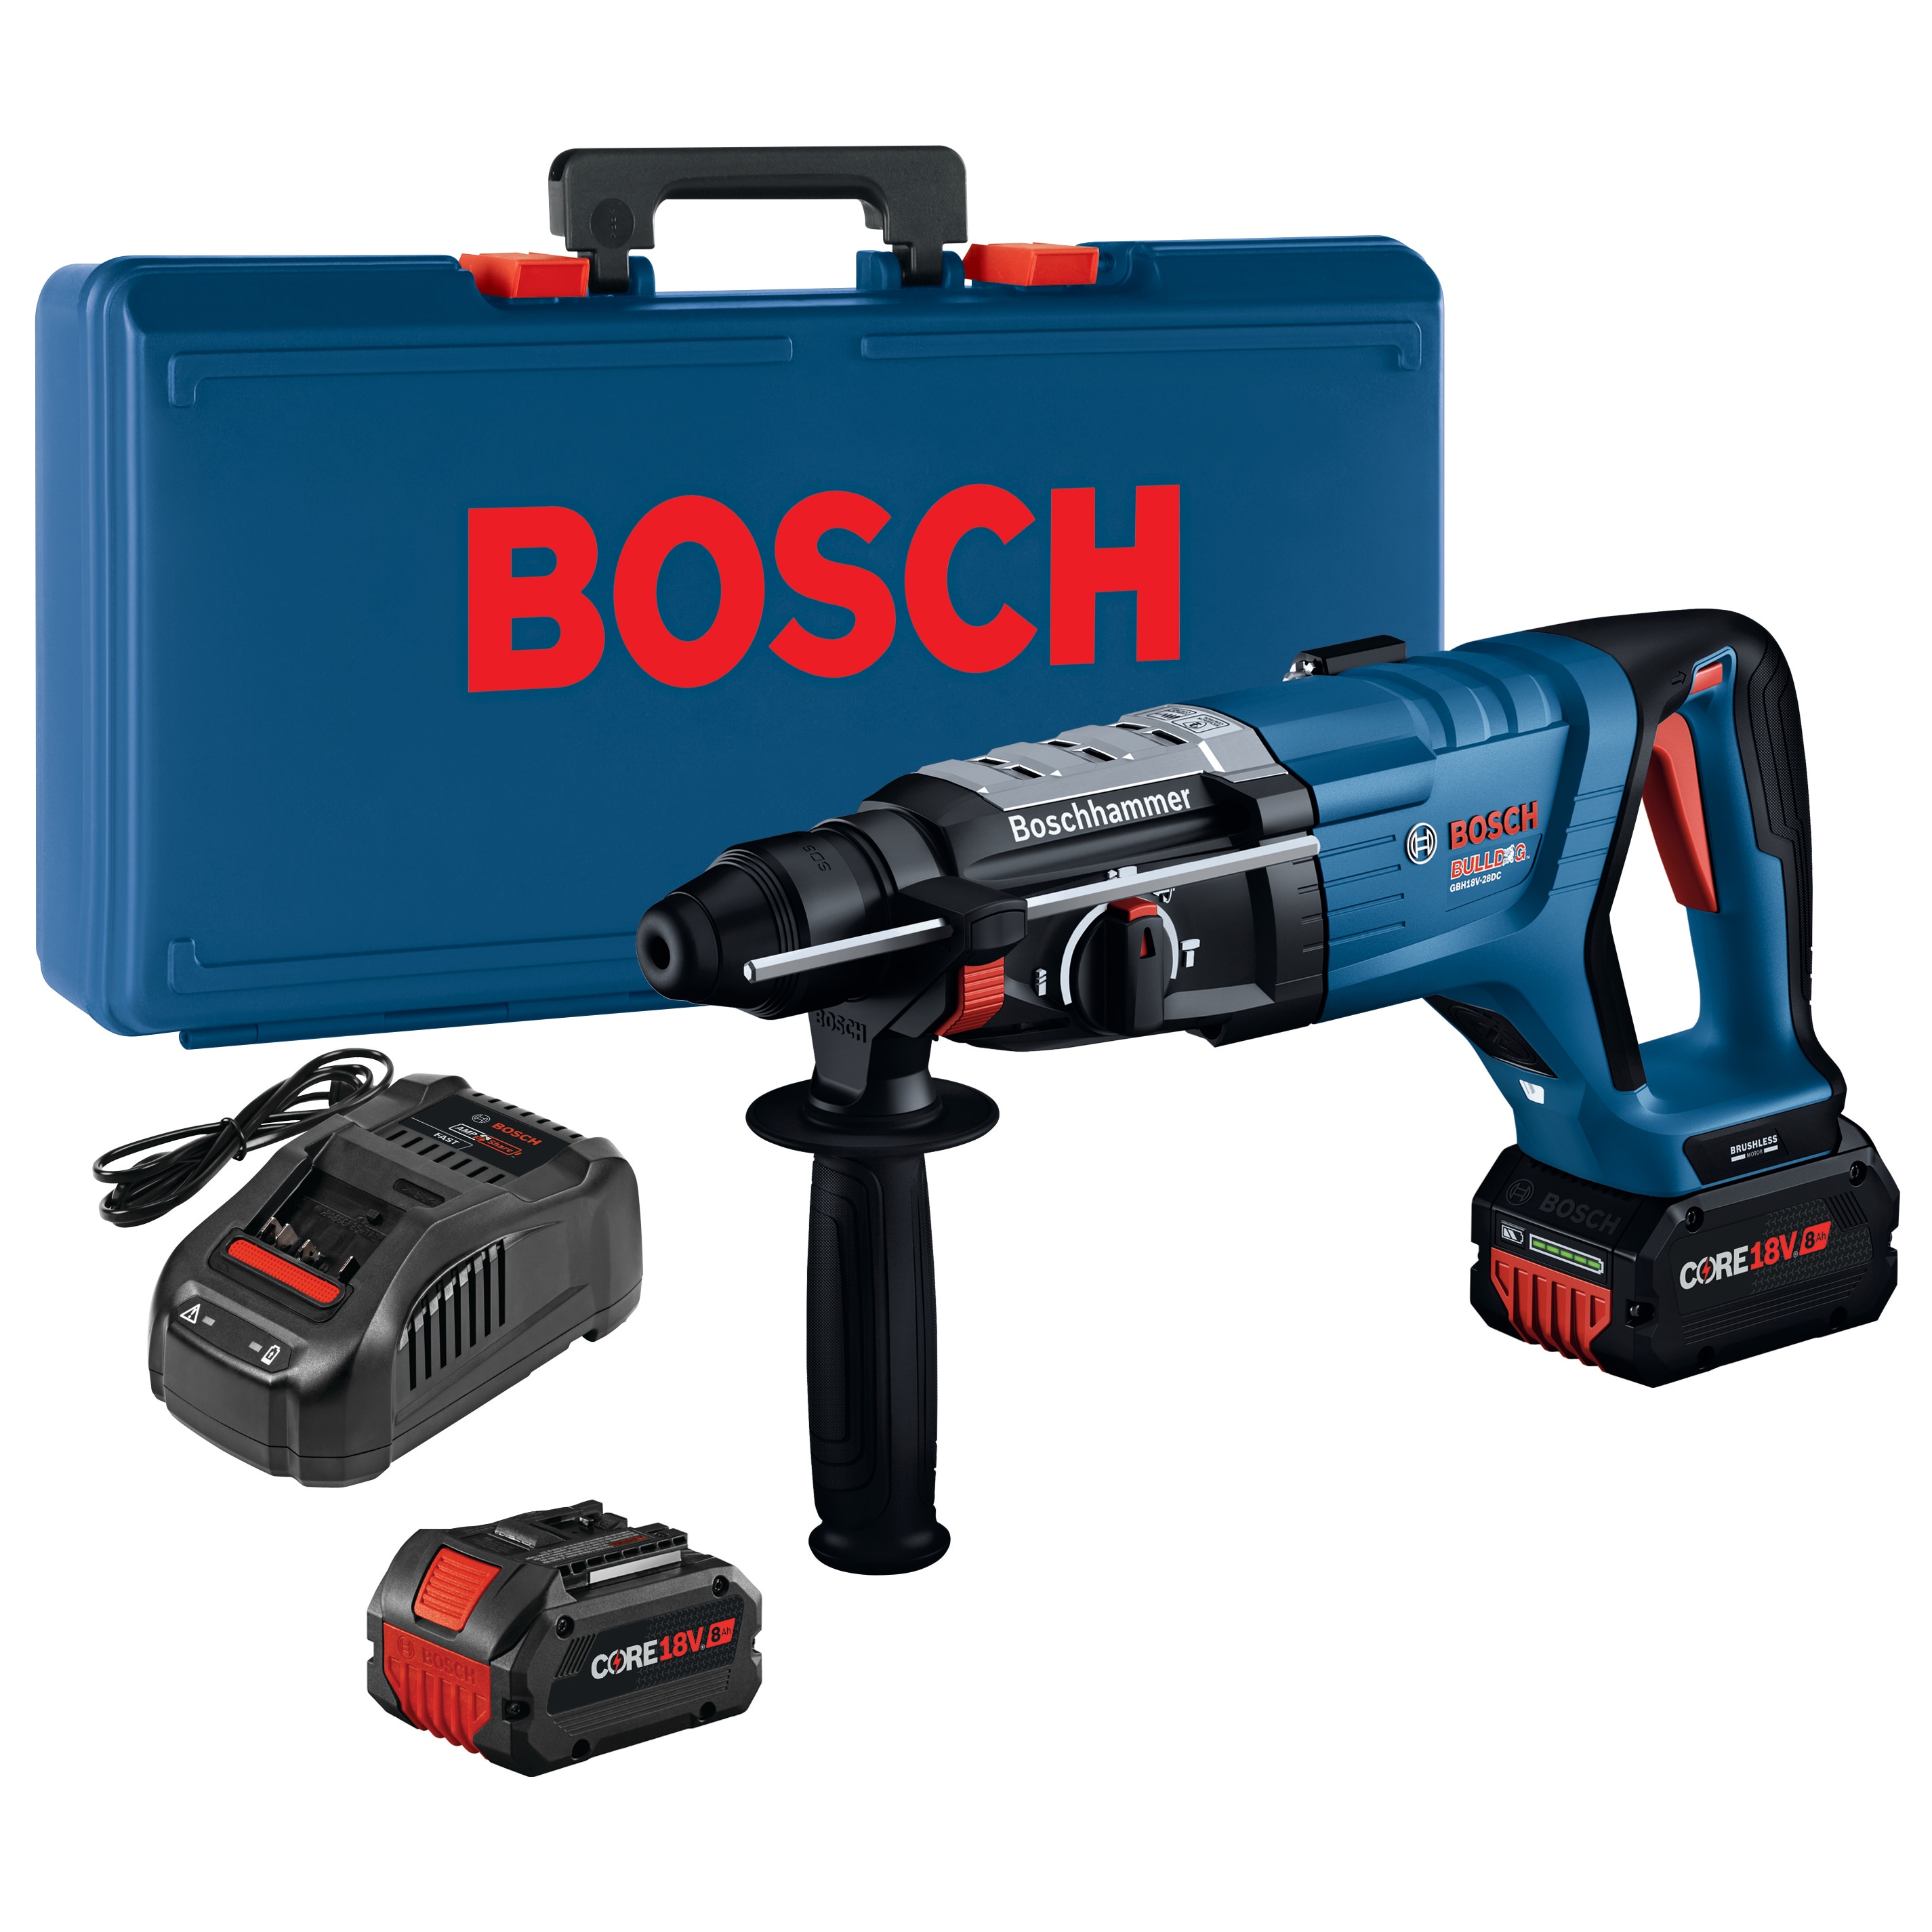 Bosch 18-volt 8-Amp Sds-plus Variable Speed Cordless Rotary Hammer